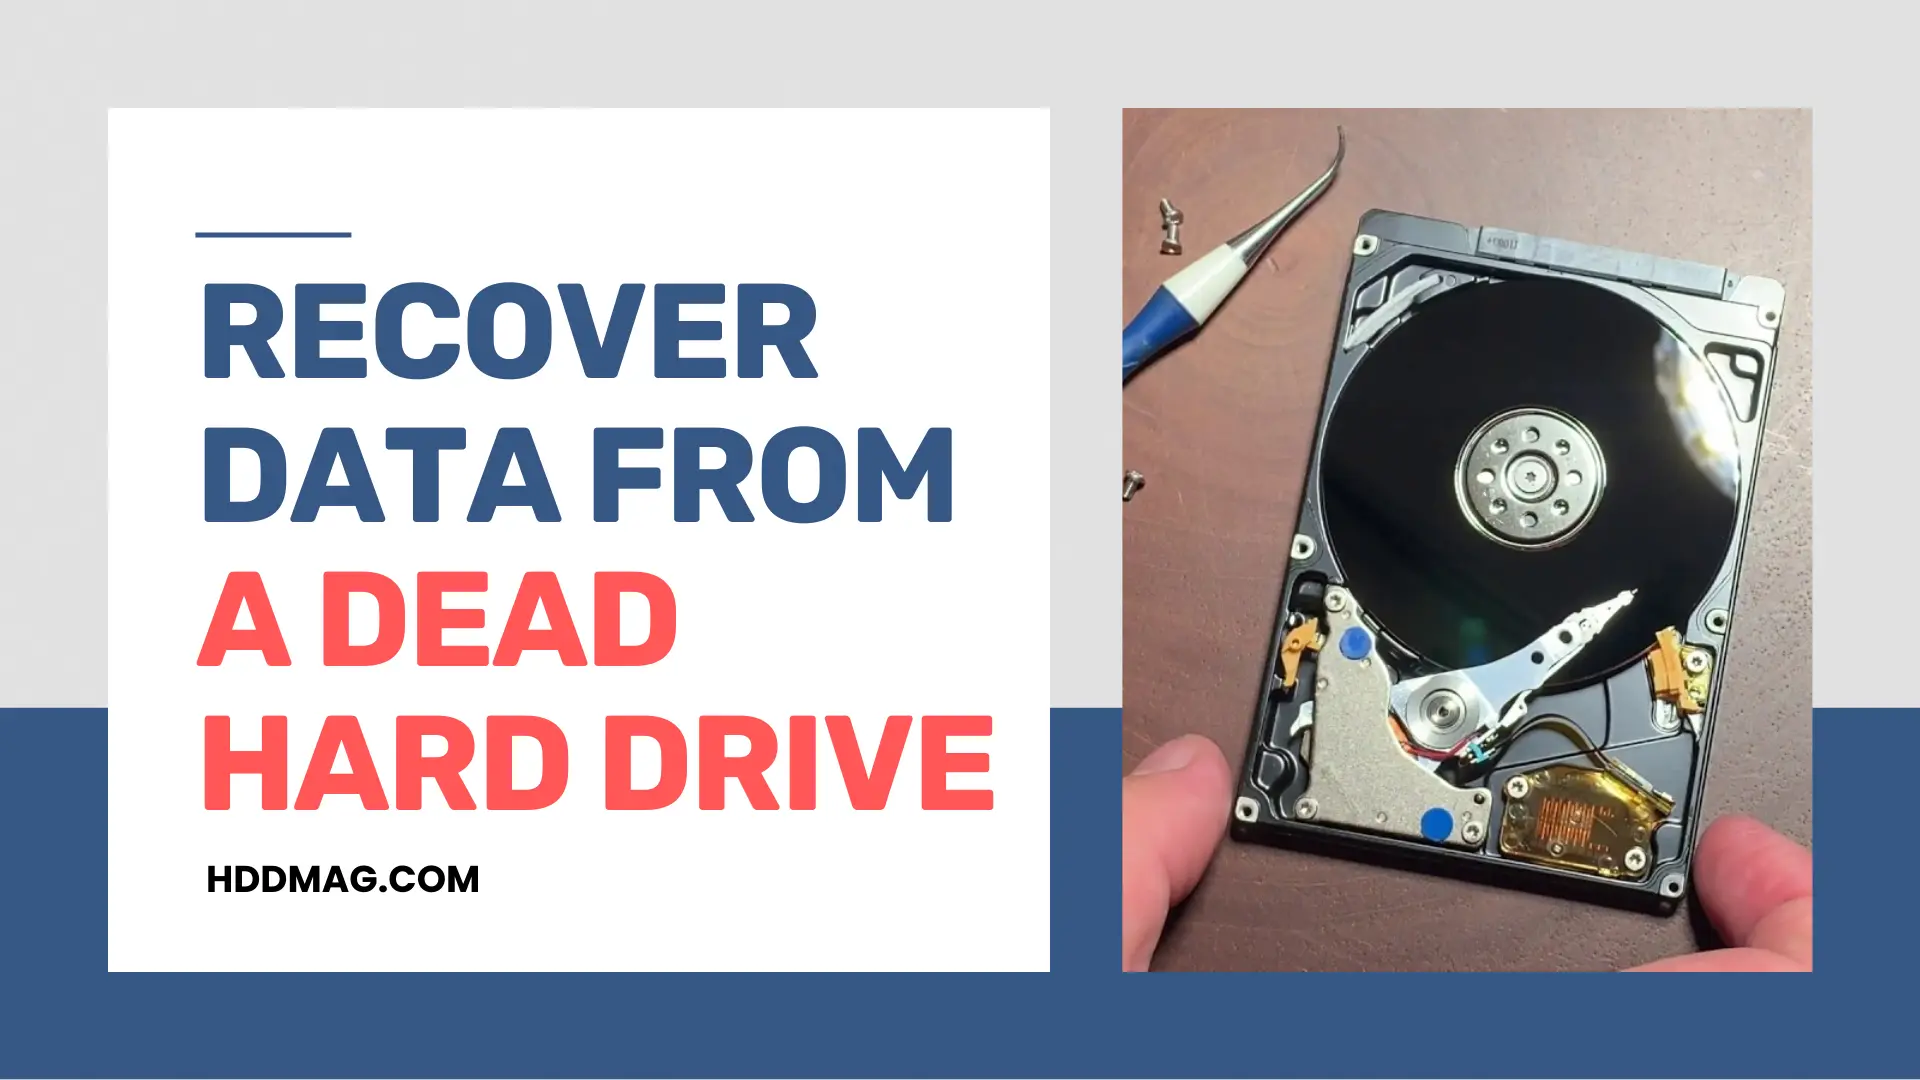 How To Recover Data From a Dead Hard Drive